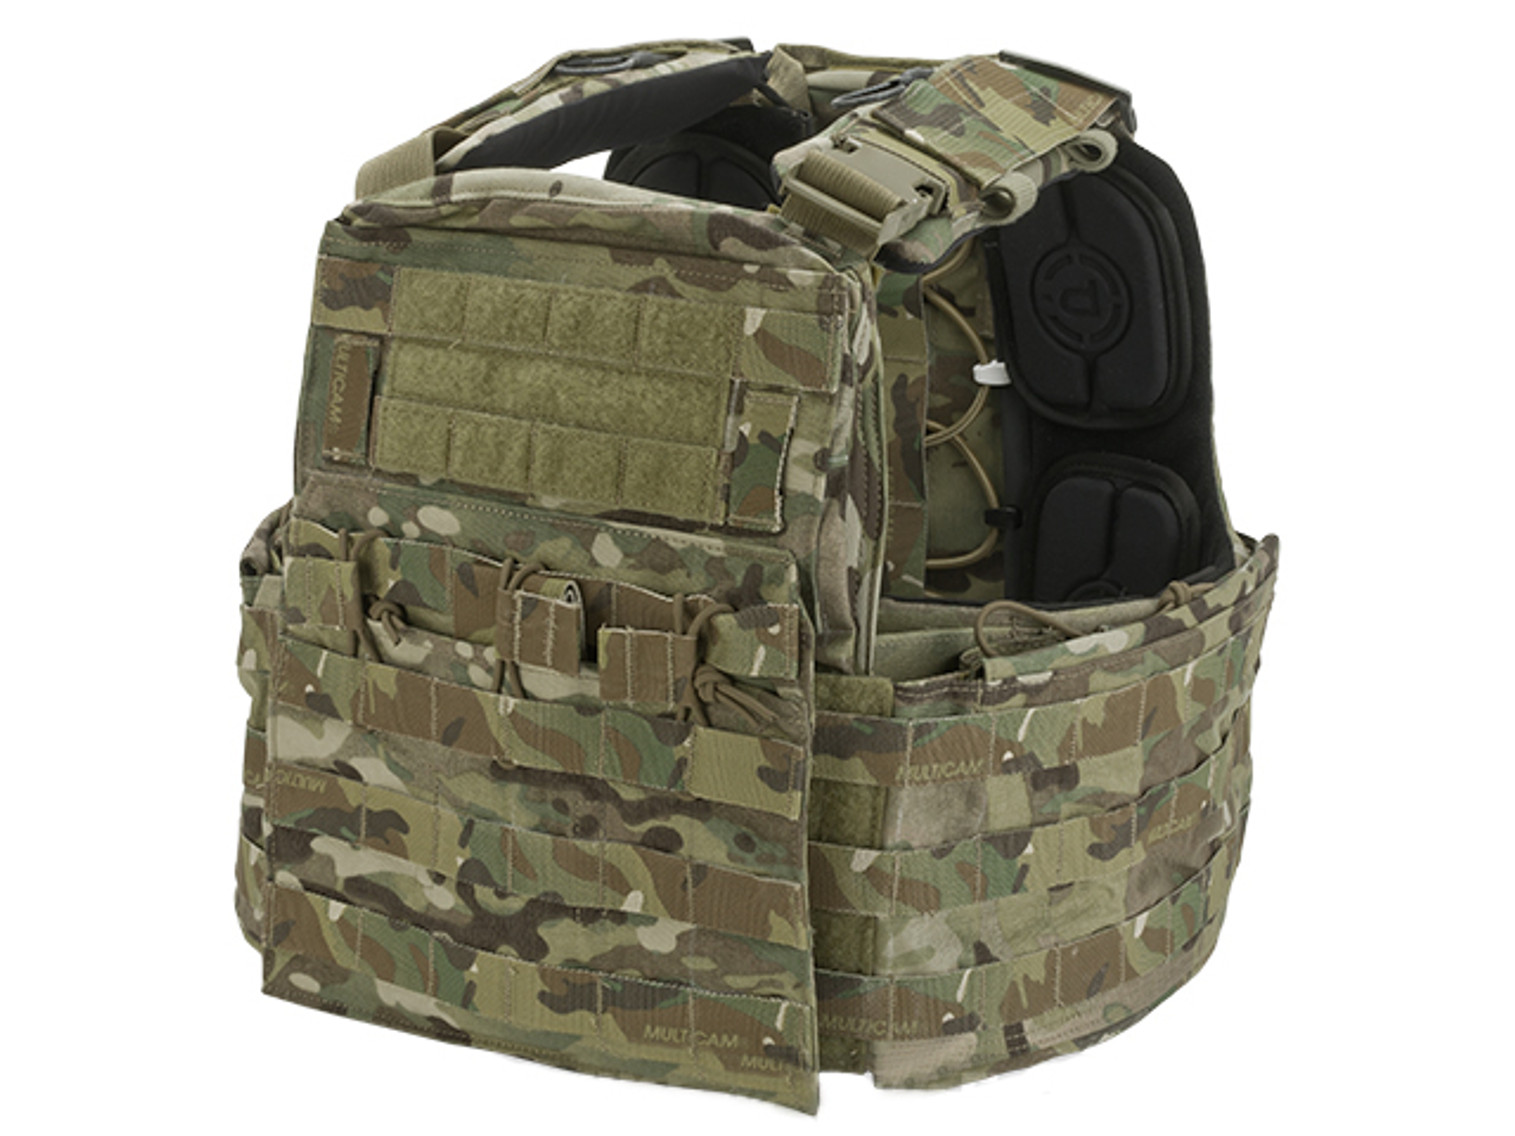 Crye Precision CAGE Plate Carrier and Plate Pouch Set - Multicam (X-Large)